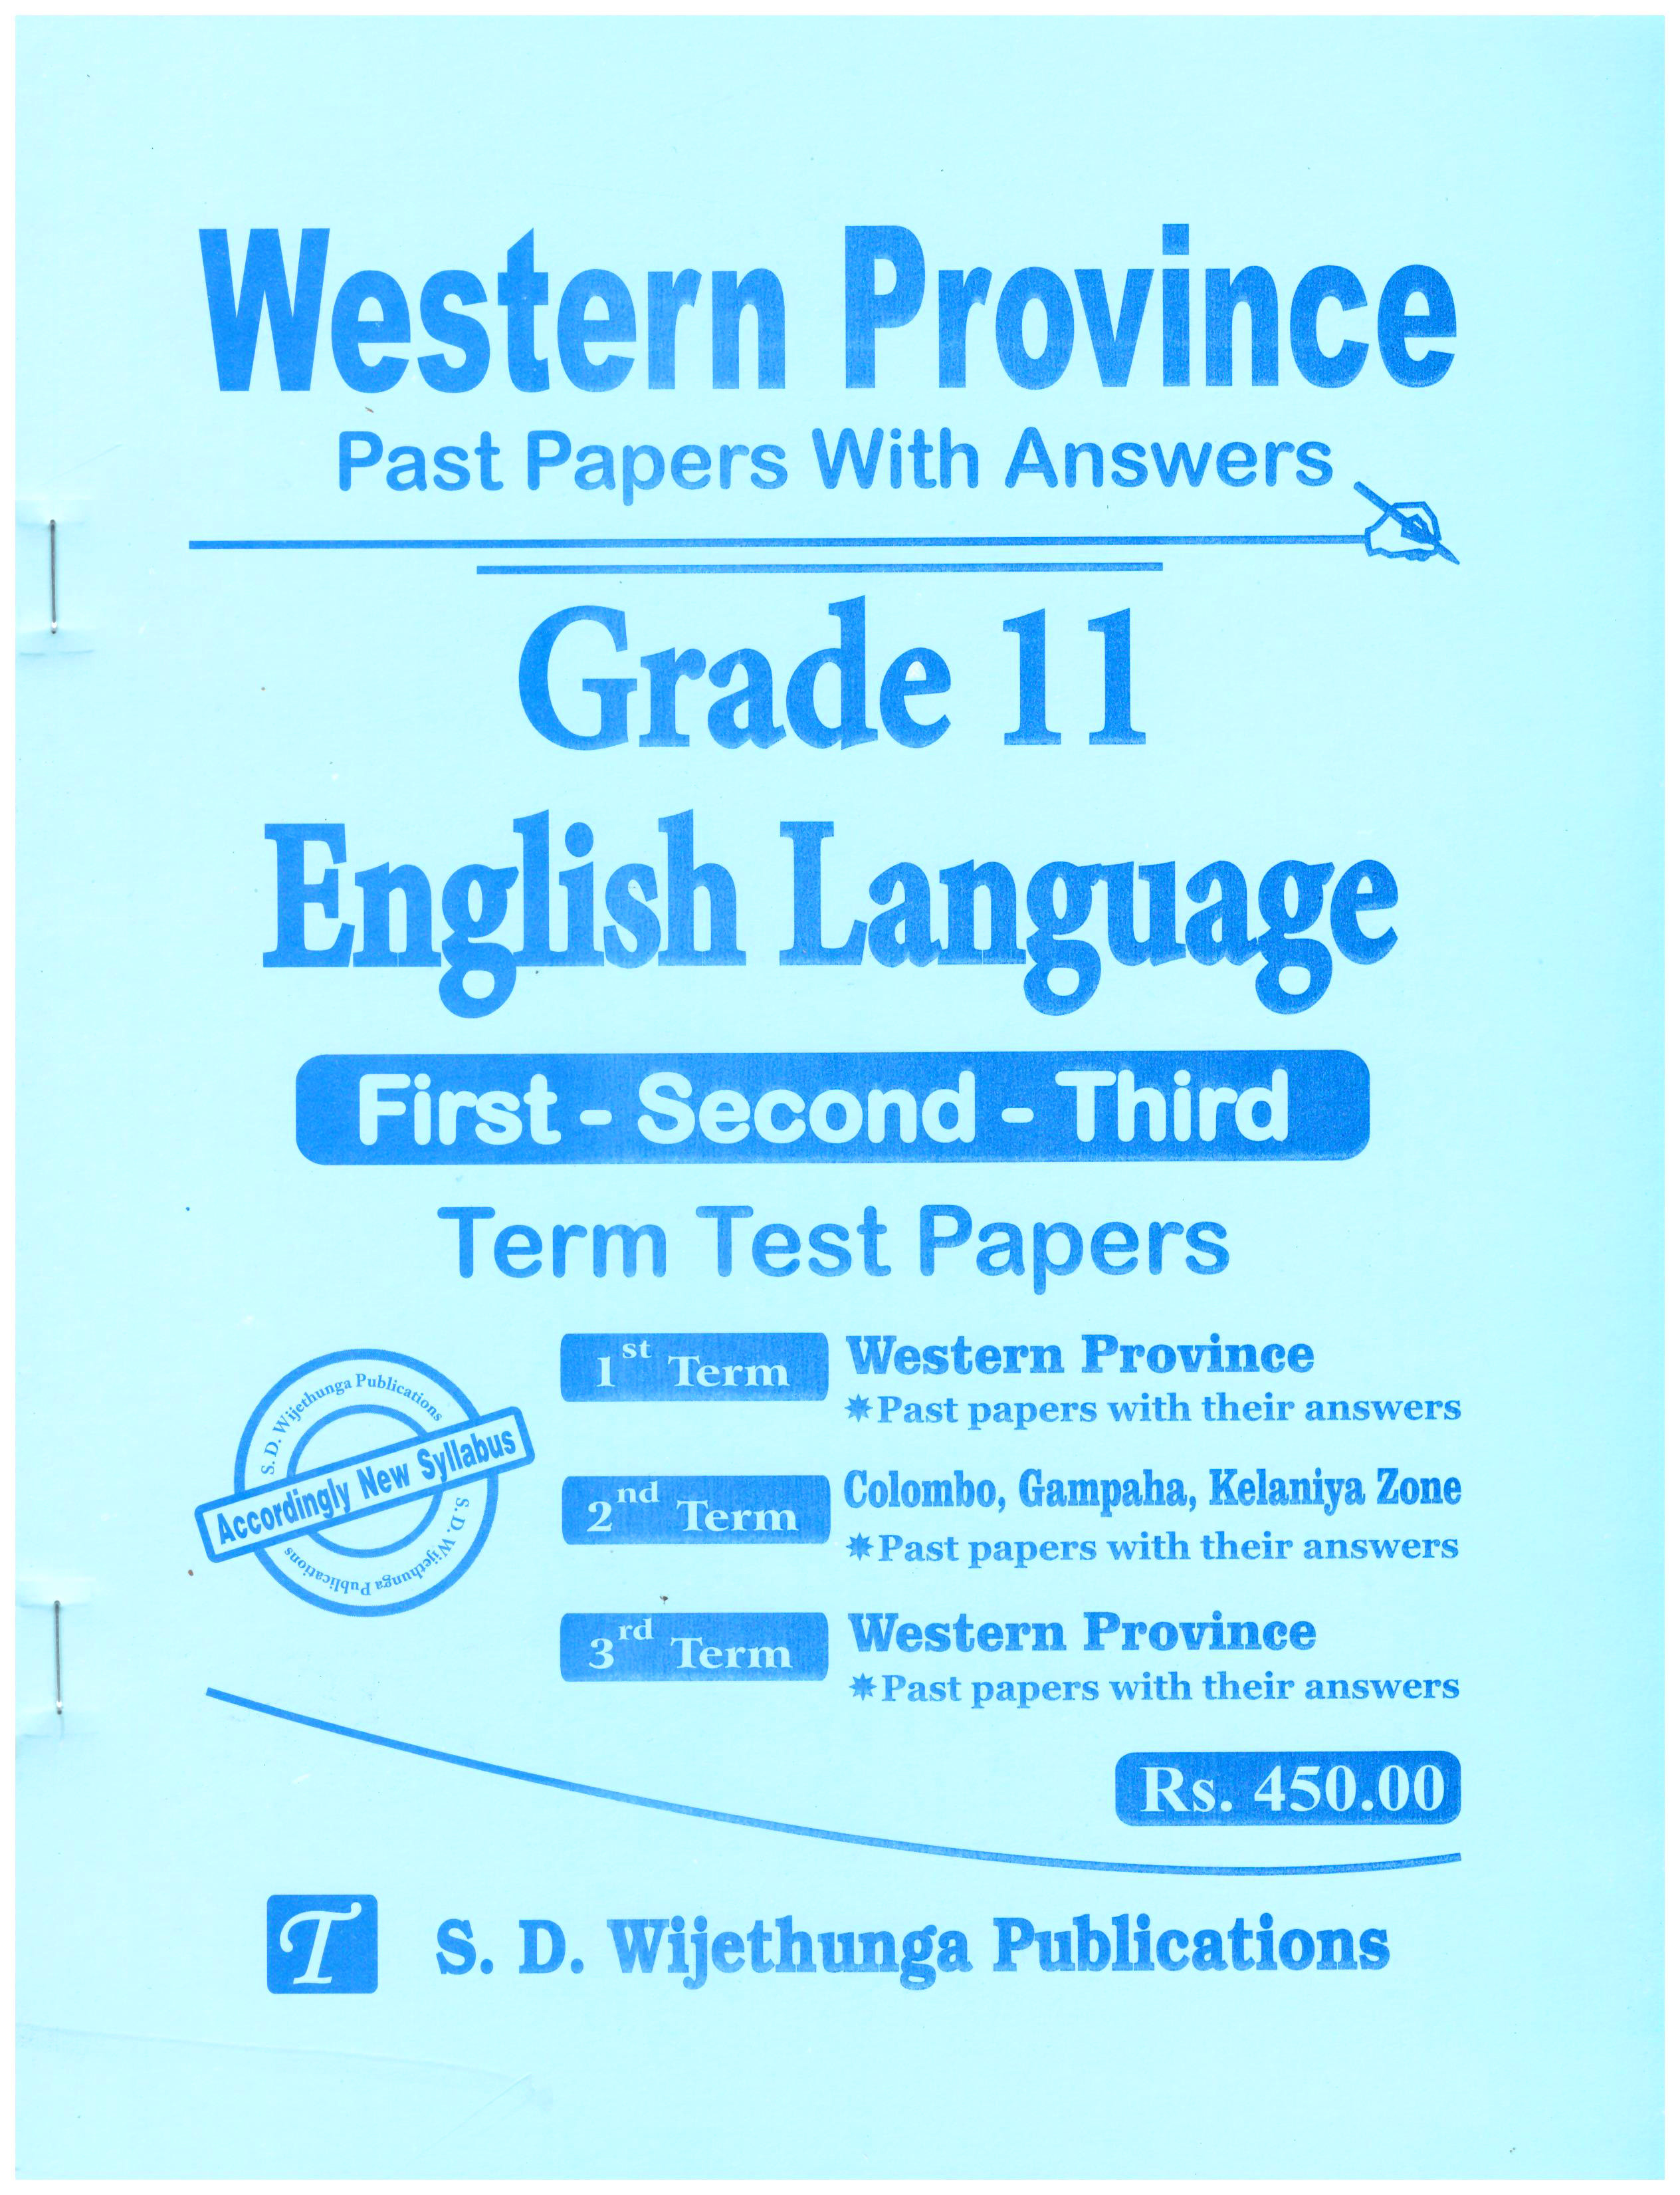 Western Province Past Papers With Answers Grade 11 English Language First - Second - Third Term Test Papers